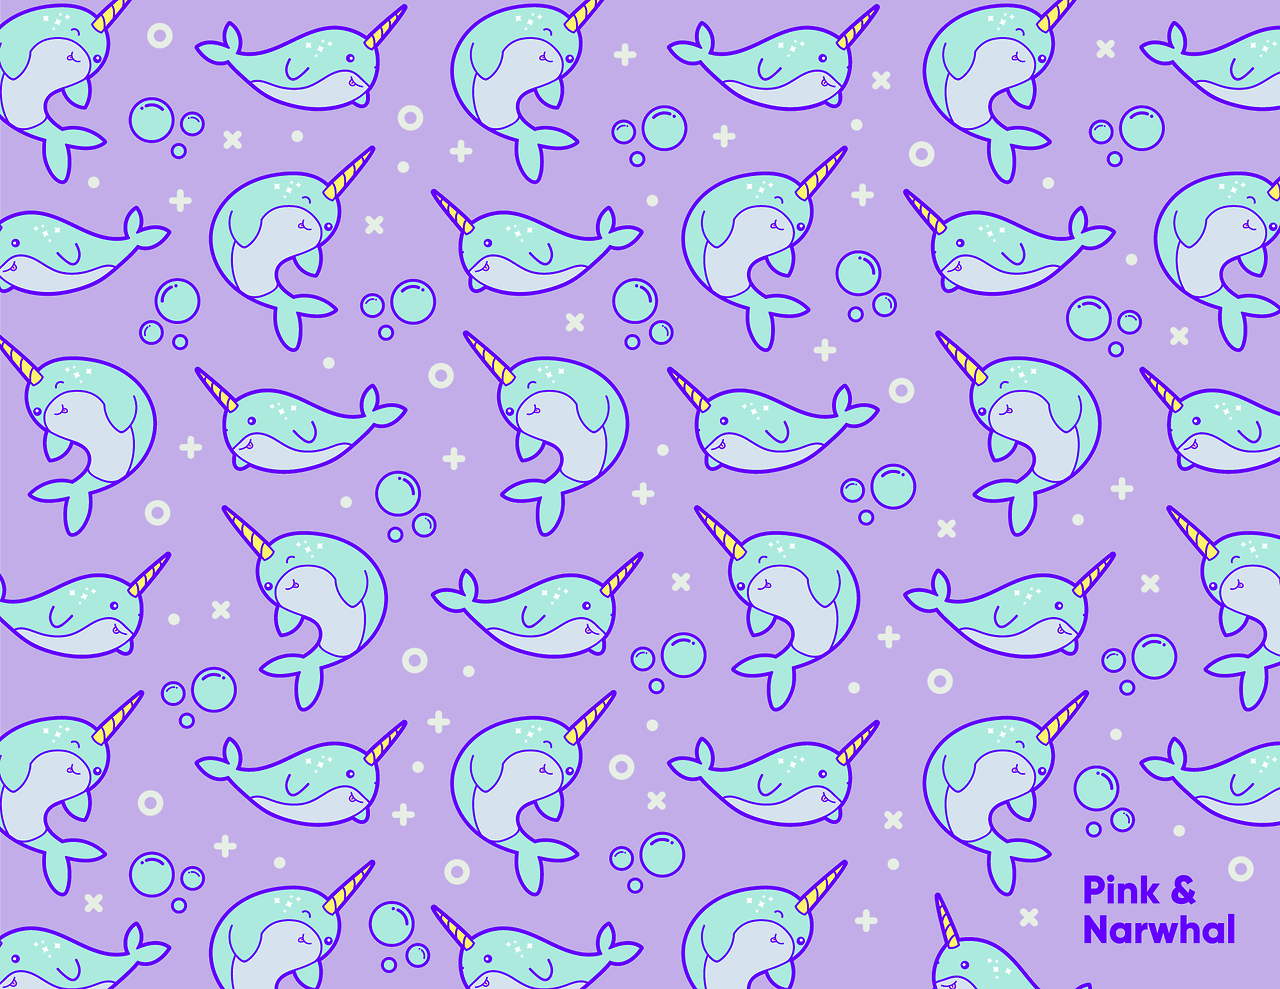 Narwhal wallpaper  Cool backgrounds wallpapers Wallpaper In wallpaper